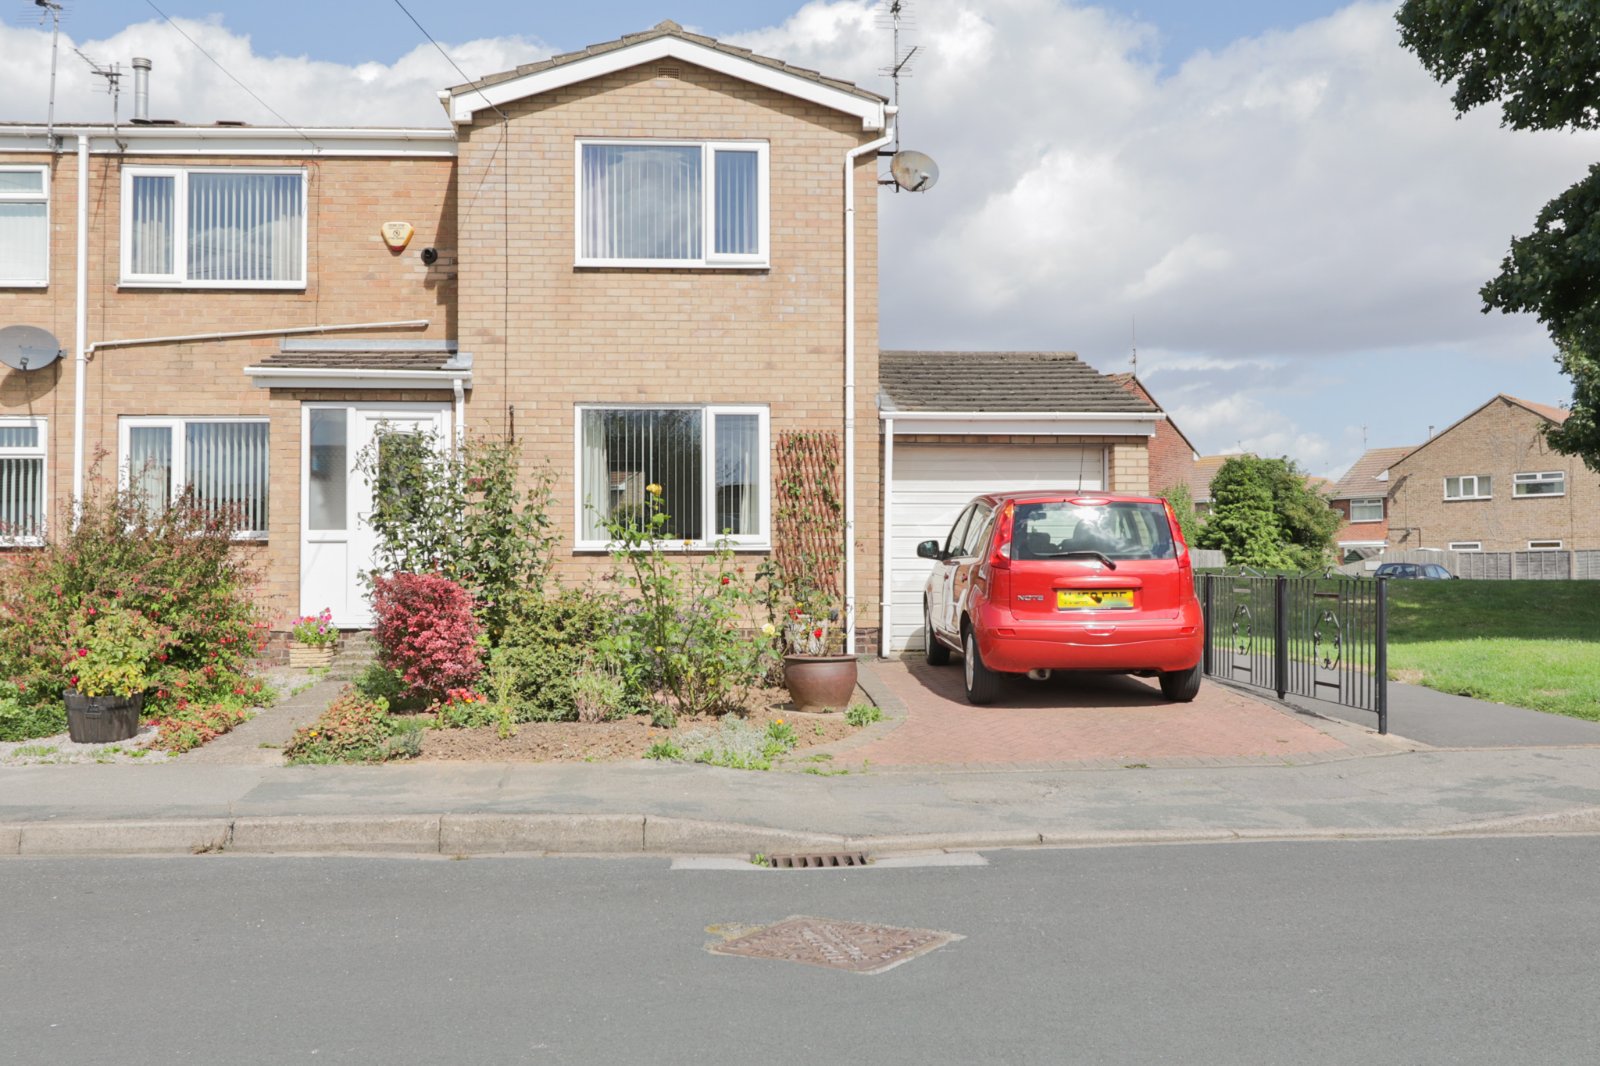 3 bed house for sale in St Marys Drive, Hedon - Property Image 1